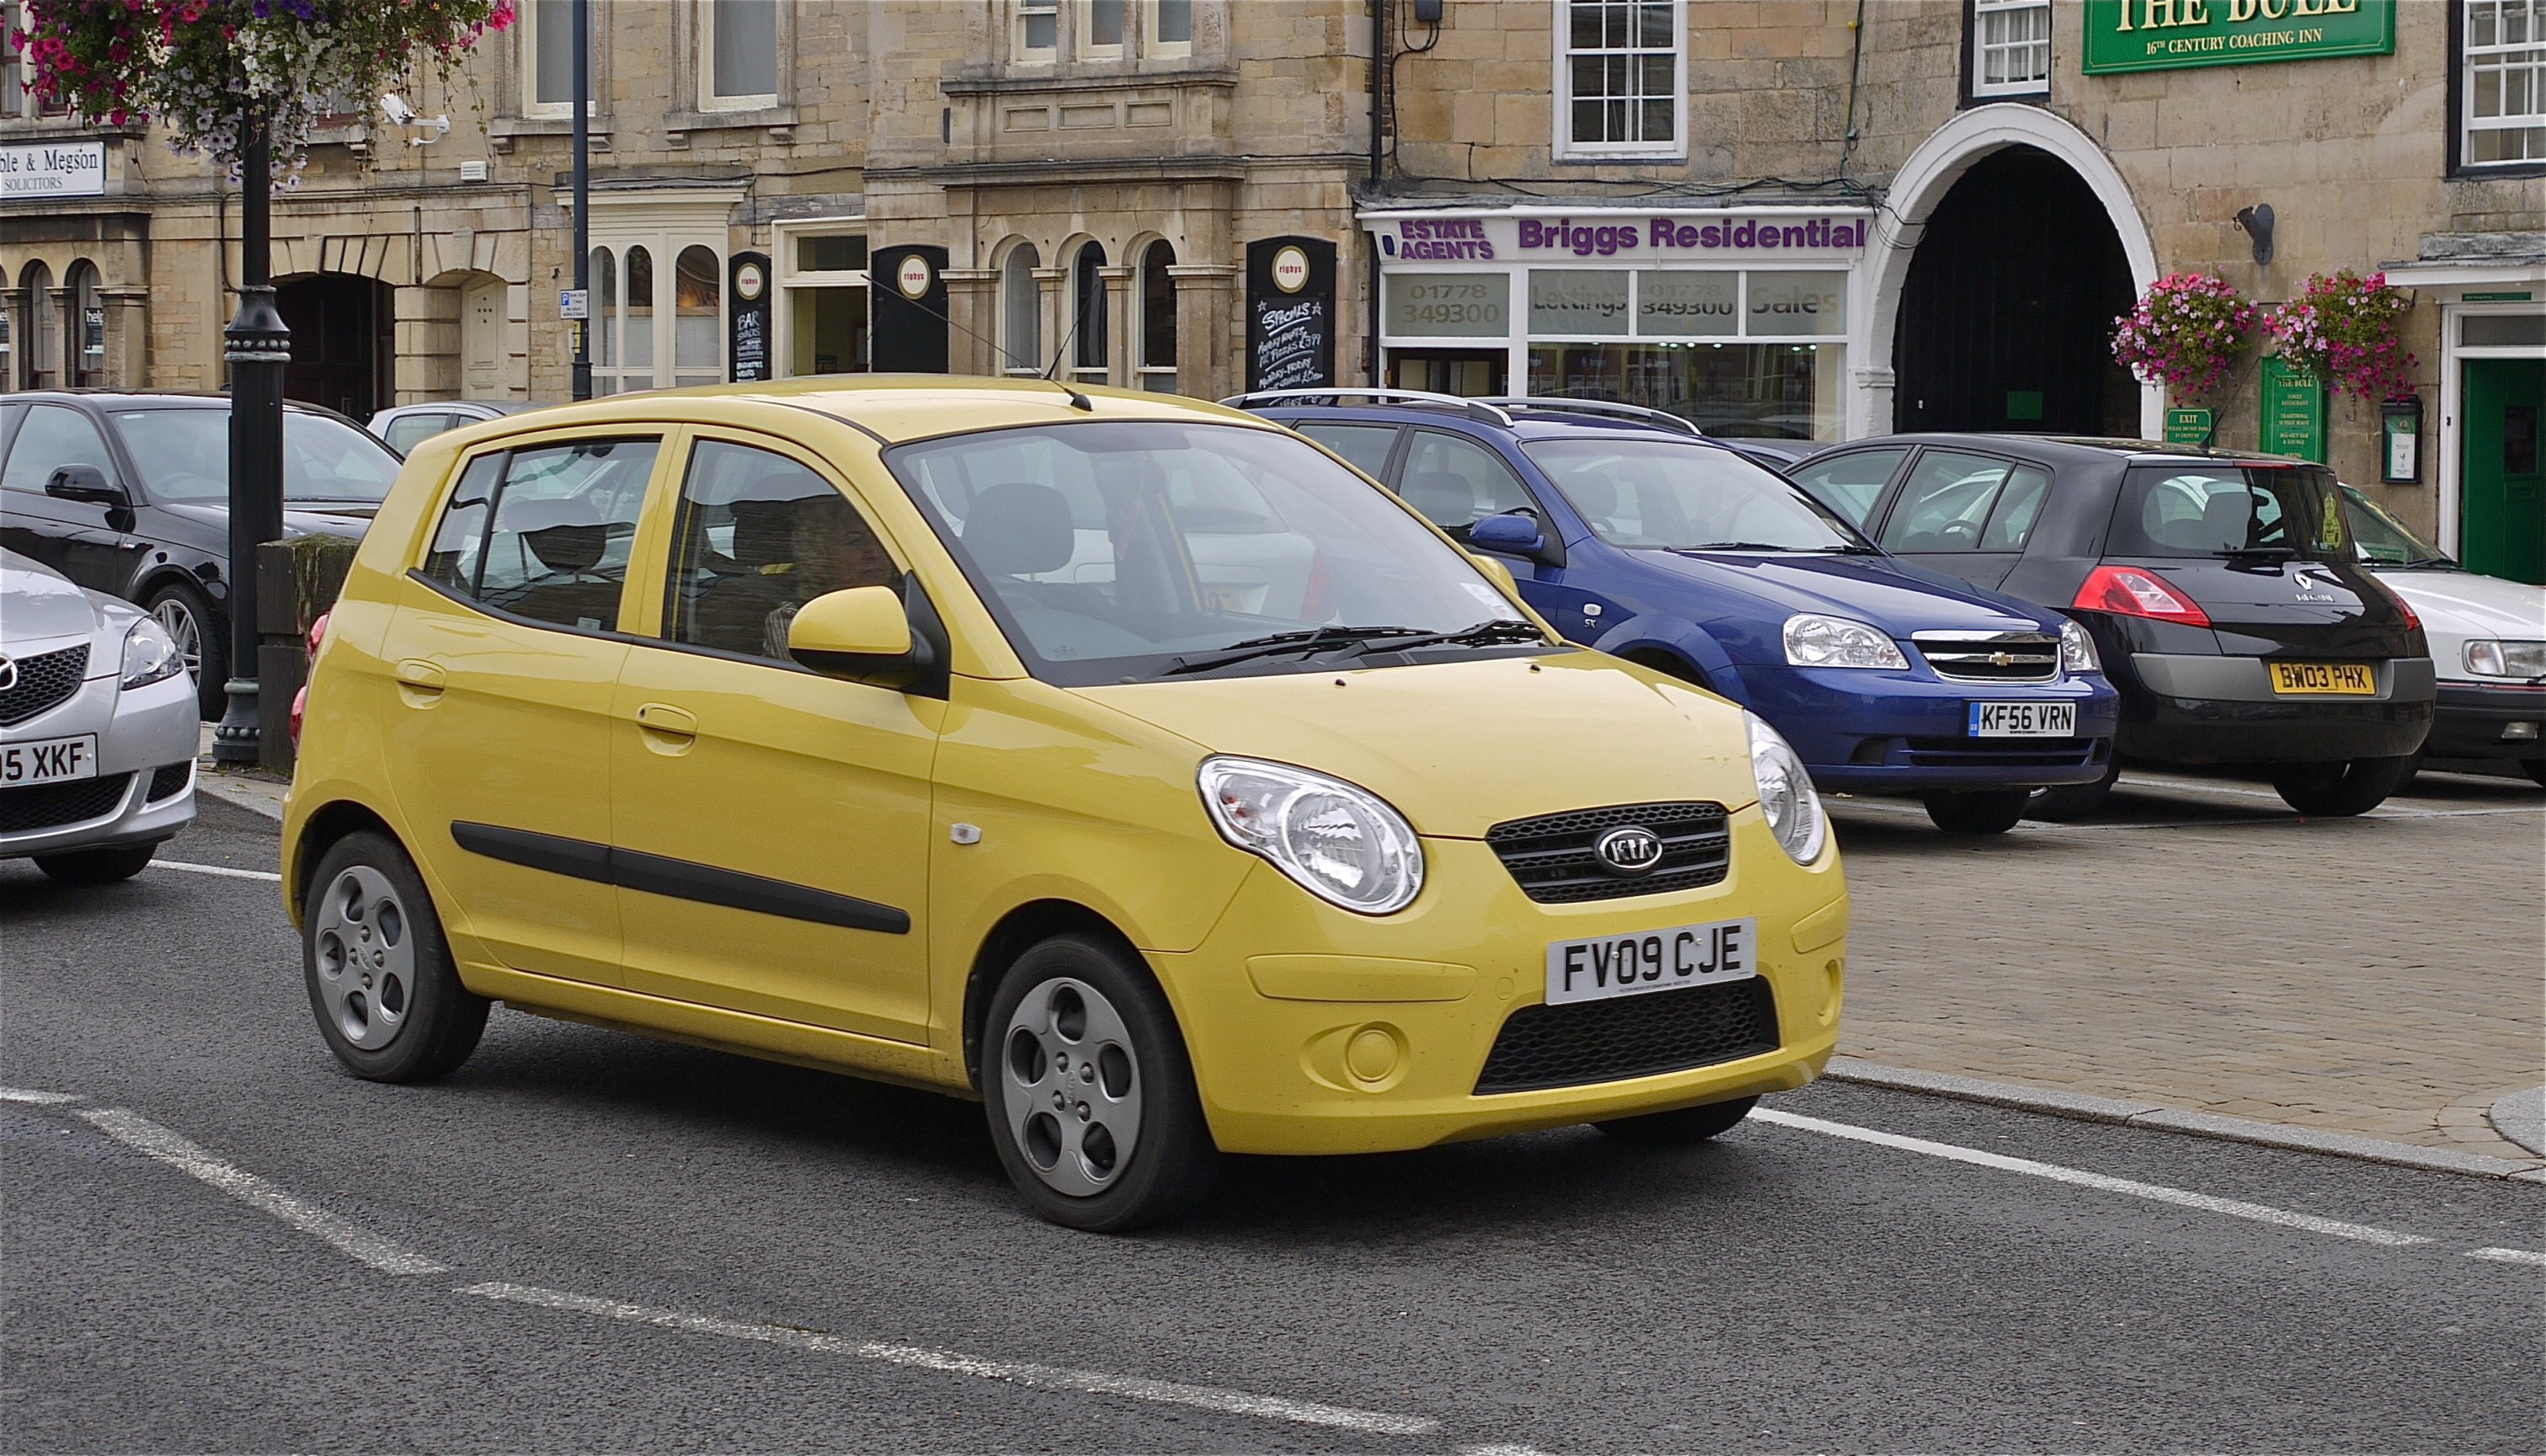 File:Kia Picanto. Not many yellow versions in the UK - Flickr ...